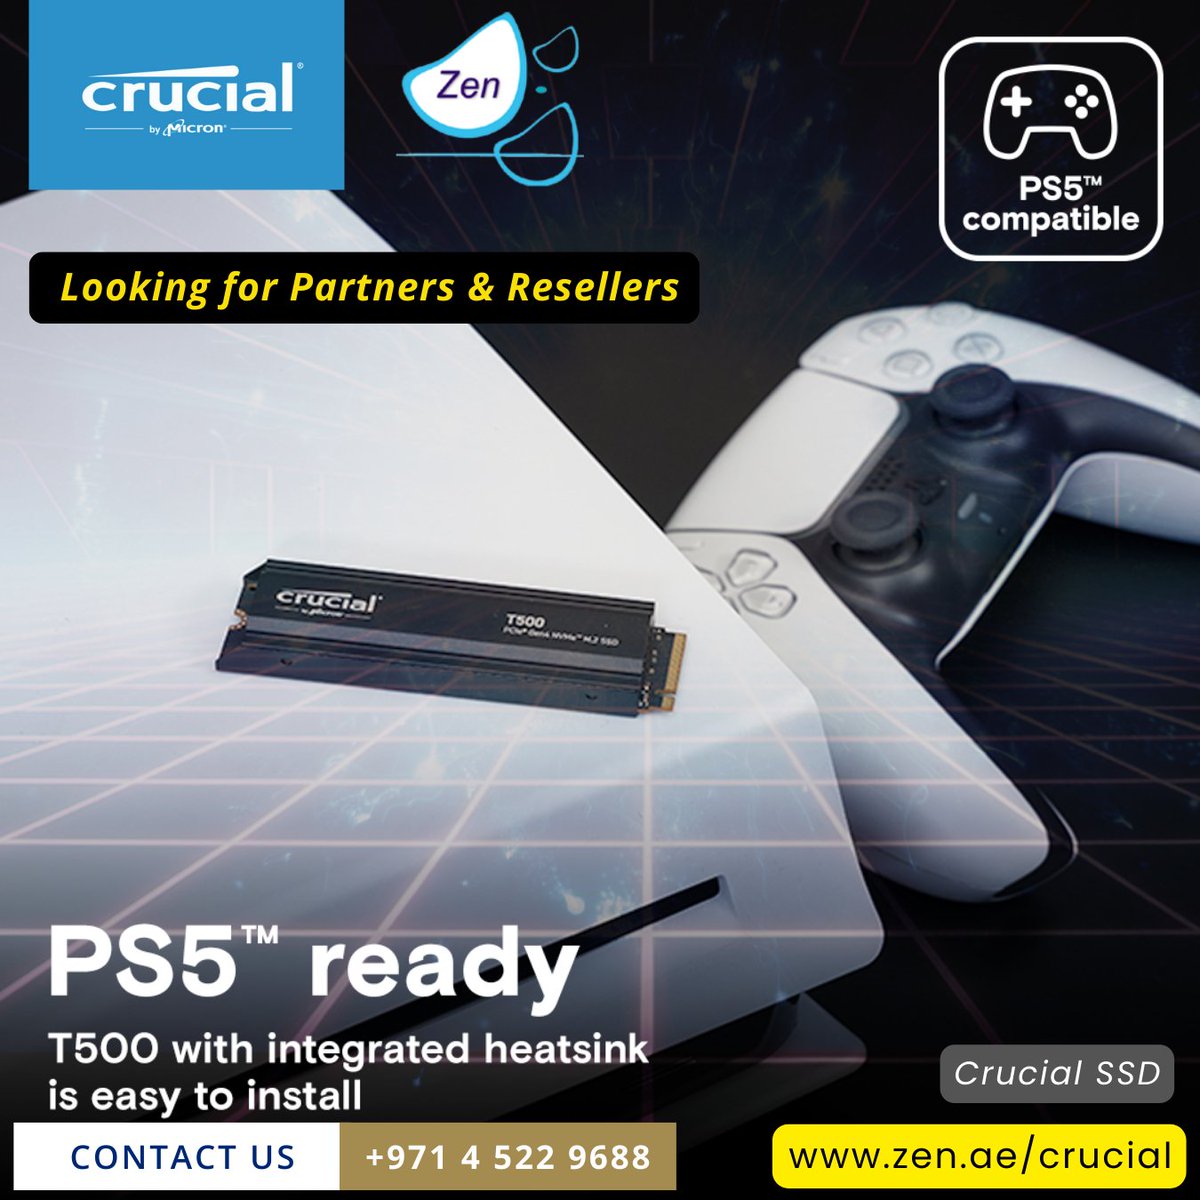 #crucial Crucial SSD

Looking for partners & resellers.

smpl.is/92nwc

#3cx #zenitdxb #zenit #businesscommunication #dubaistartup #3cxhosting #simhosting #saudistartups